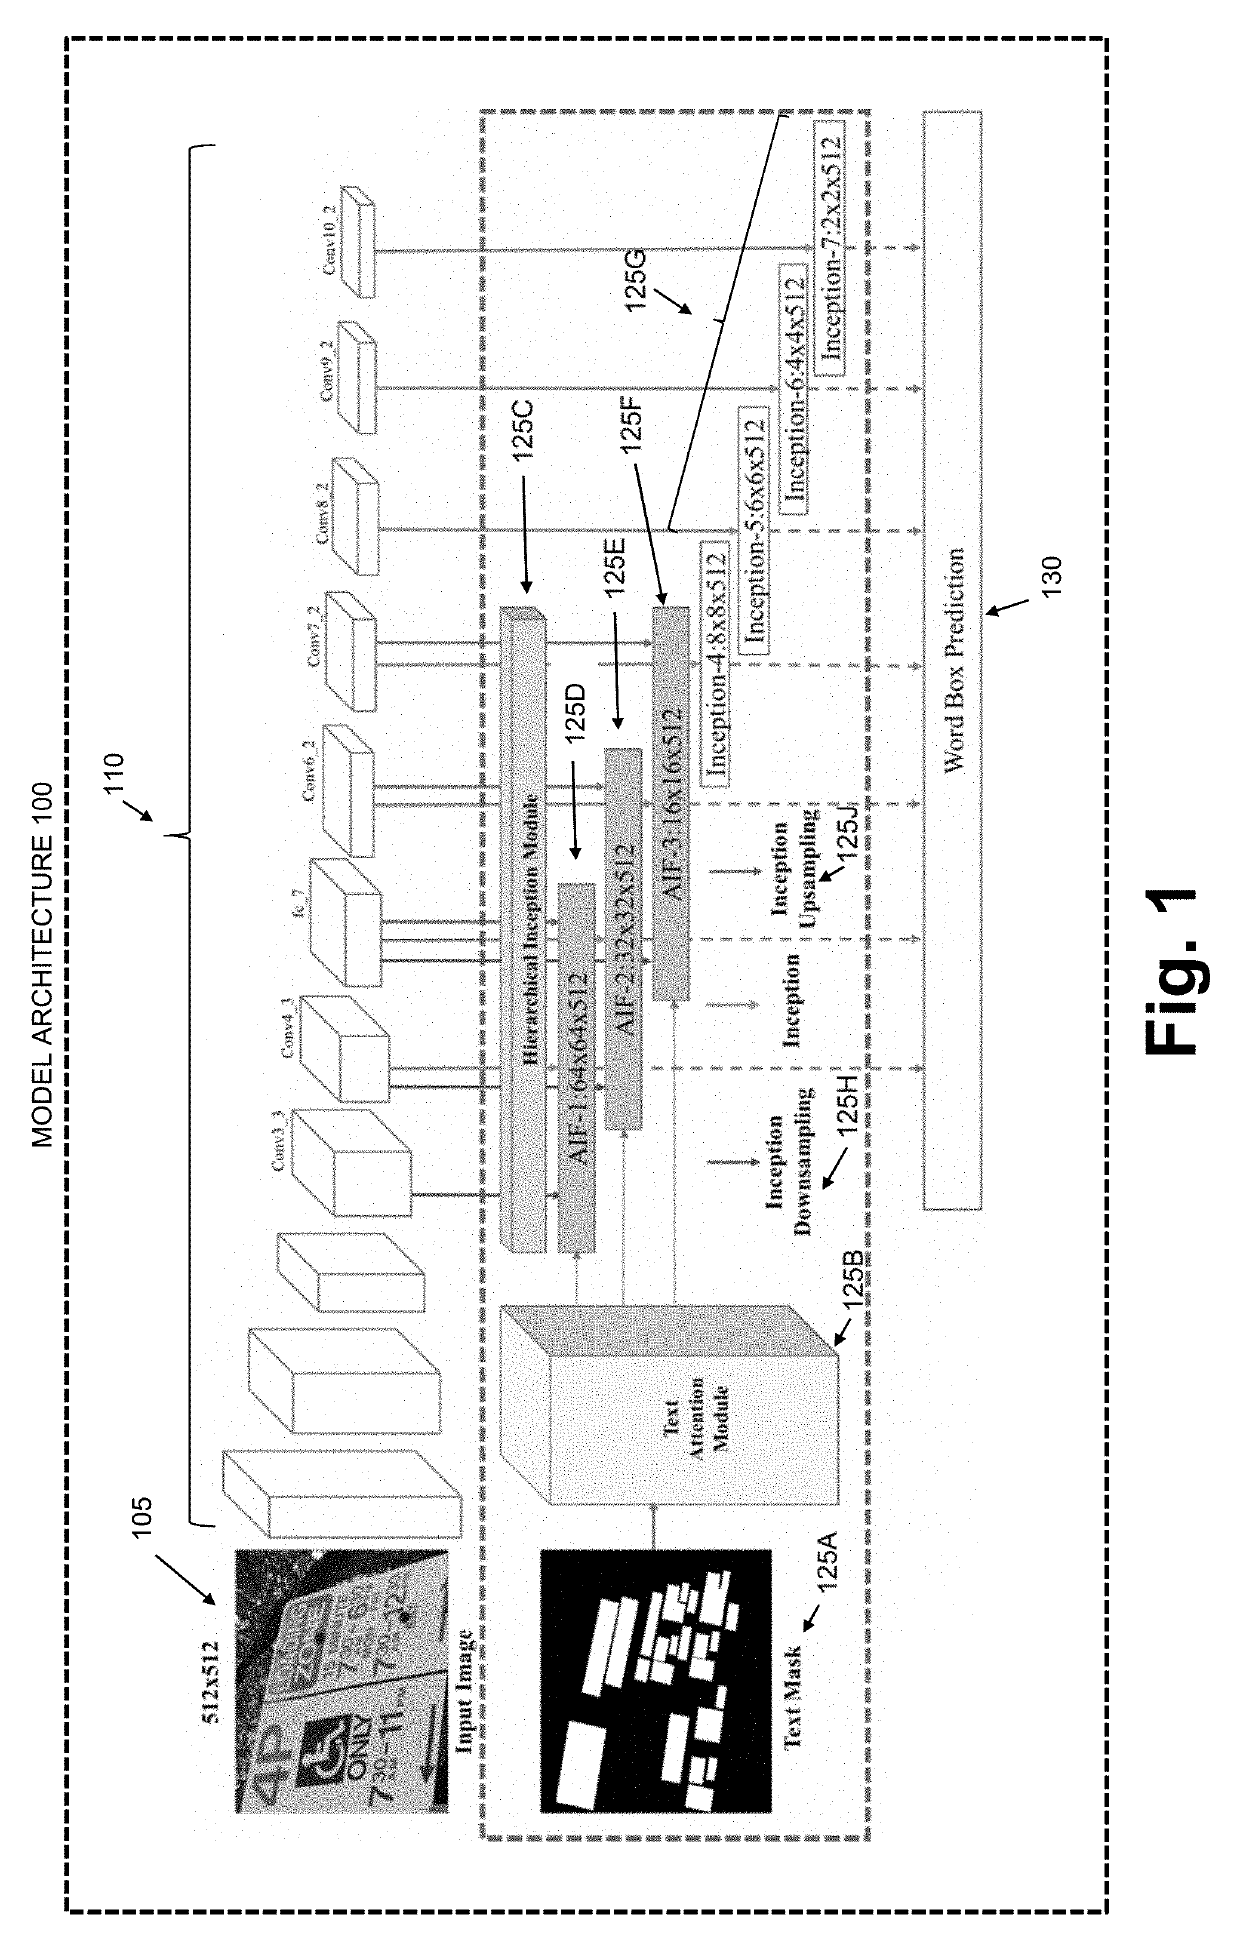 Apparatus and method for detecting scene text in an image